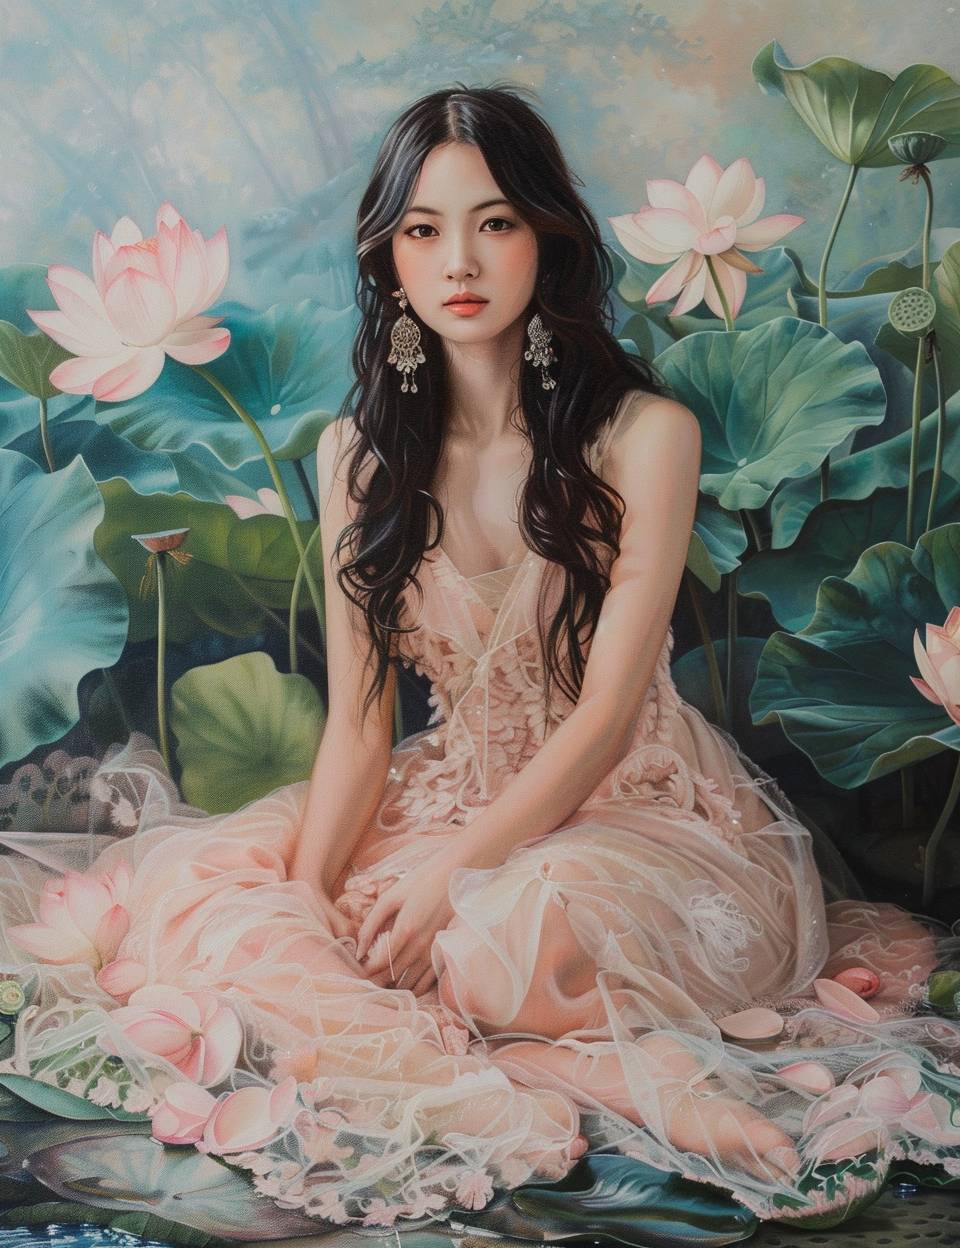 Oil painting, a full body portrait of an Asian woman sitting on the ground in a light pink dress with lotus flowers and leaves around her, wearing delicate earrings and with long hair. The portrait has flowing and soft lines with a fairyland background of a green landscape surrounded by clouds creating a misty feeling. The painting uses oil paint strokes and artistry in the style of Chinese landscape paintings.